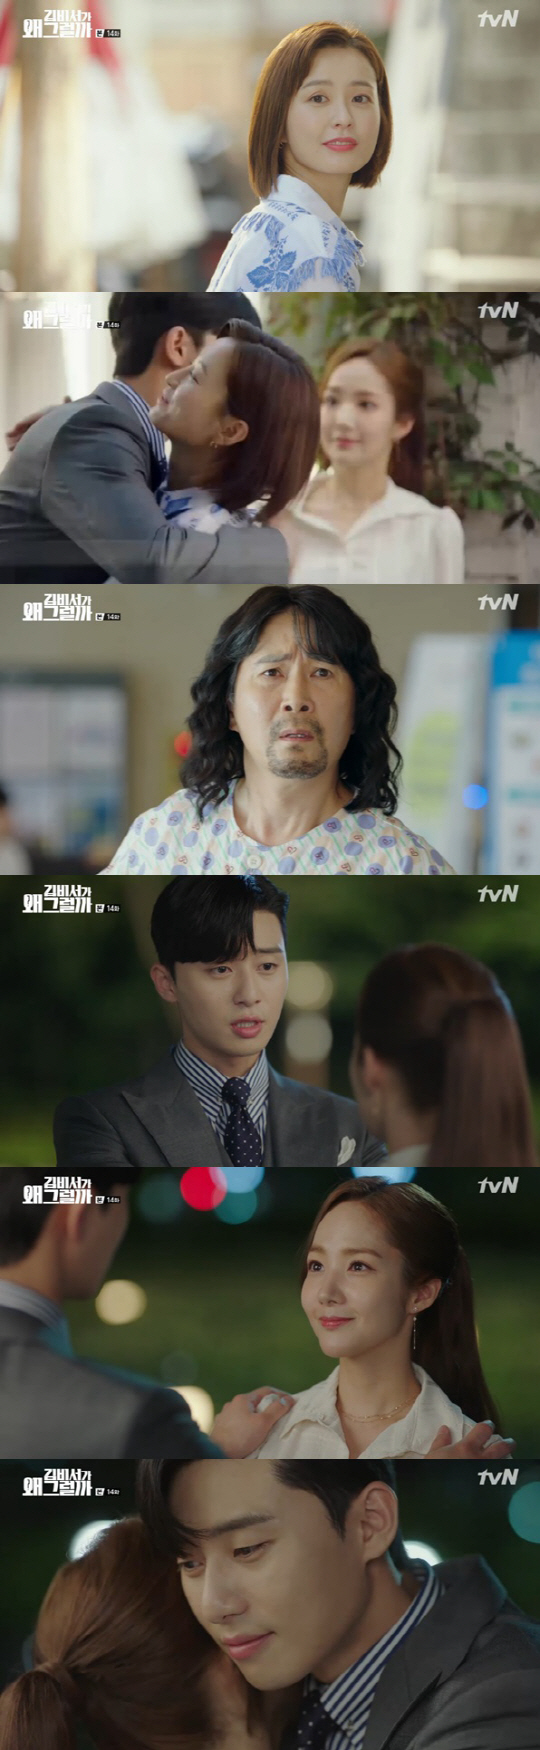 Can the two people make fruit of love with marriage?In the TVN drama Why is Secretary Kim doing that? broadcast on the 19th, Kim Mi-so (Park Min-young) reversed his decision to leave and was pictured remaining with Lee Young-joon (Park Seo-joon).After a hot first night, Smile and Youngjun shared a morning kiss. Youngjun told a smile in his shirt, I did not know that it was such a dangerous clothes.It is a clothes that shakes my composure, and the smile was a lot better, saying, The vice chairman of these days is much better. The two went one step further, revealing their friendship not only to their families but also to their company people and acquaintances.Young Jun introduced a smile to Jung Yoo-mi, who was a man of the Young Jun, and was embarrassed by the appearance of Yumi, and felt a subtle jealousy by the affectionate smile of the two.Young-joon also informed his father (Jo Duk-hyun) of his friendship.The father of the smile, who pretended to oppose the fellowship to provoke Young-joon, told Young-joon afterward, I hope that the smile that has been working for many years due to difficult circumstances will find what I want to do now and become happy.After listening to her smile father carefully, Young Jun accepted her decision to leave for the true happiness of the smile, saying, Whatever smile is, I will always be with it.I will stop sending my secretary, who has been great for nine years, now. I have been working hard for you. The day of the smile came to the front of the nose, and the smile that gradually fell out of work after the takeover felt an unknown emptiness.Smile decided to continue with the company. Smile said, I want to stay as secretary. I think I can do best and fit.I want to stay with you because I love you. Young Jun, who was impressed by this, said, I want to eat if I go home every day and eat together.I want to marriage with Kim Mi-so, she proposed.There is a growing interest in whether the two people who have been formed with the deep ties of the past can make the fruits of love with marriage.